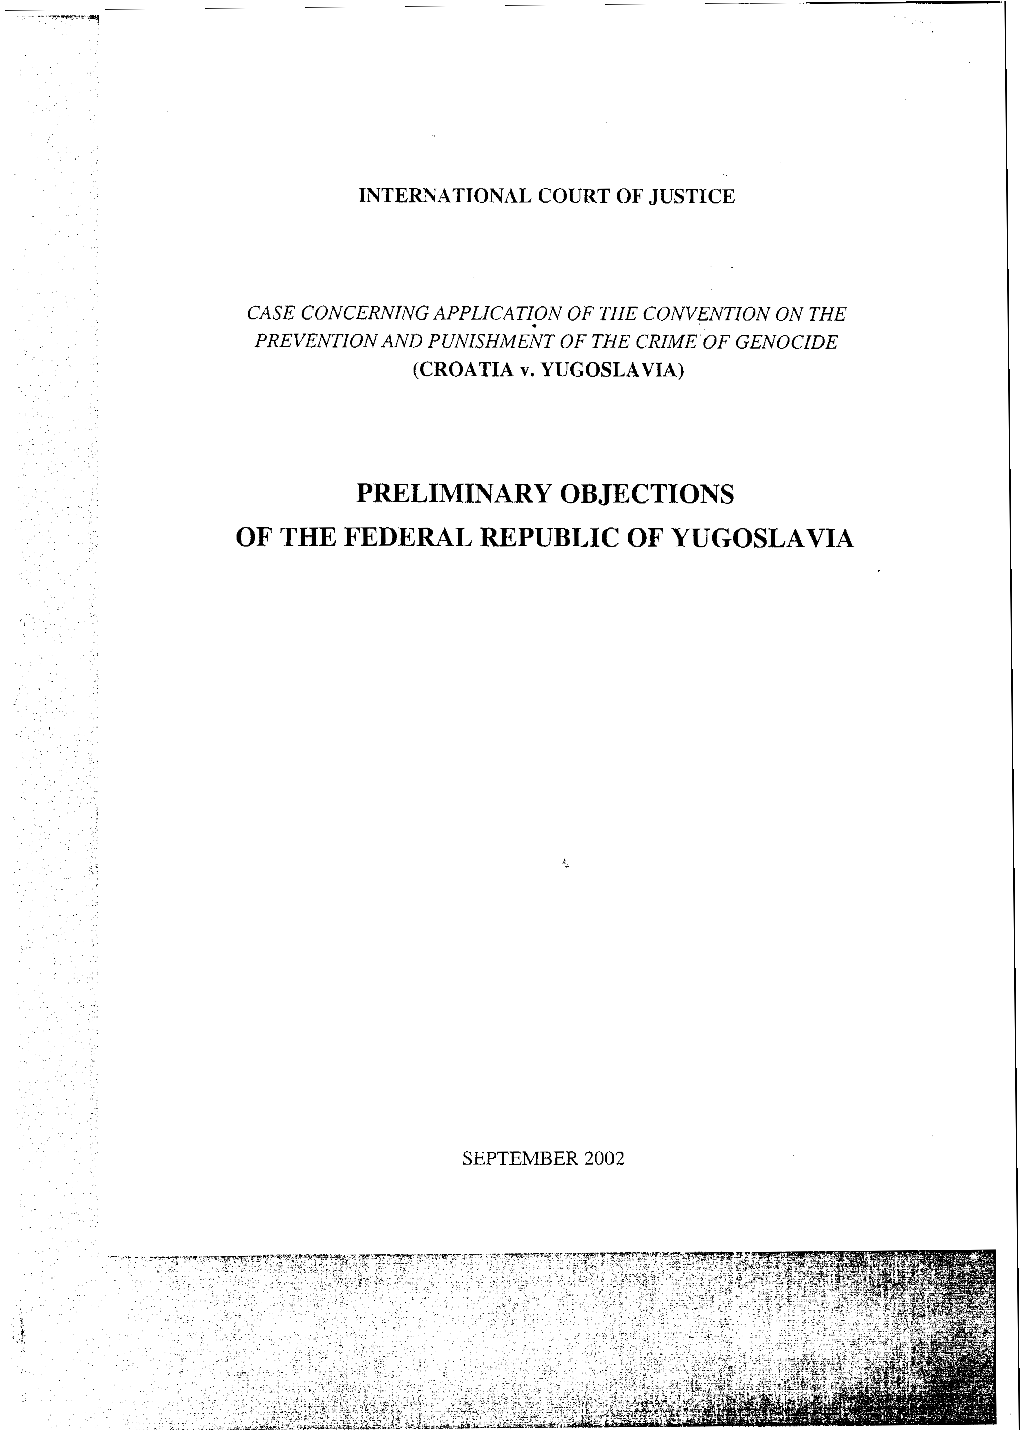 Preliminary Objections of the Federal Republic of Yugoslavia